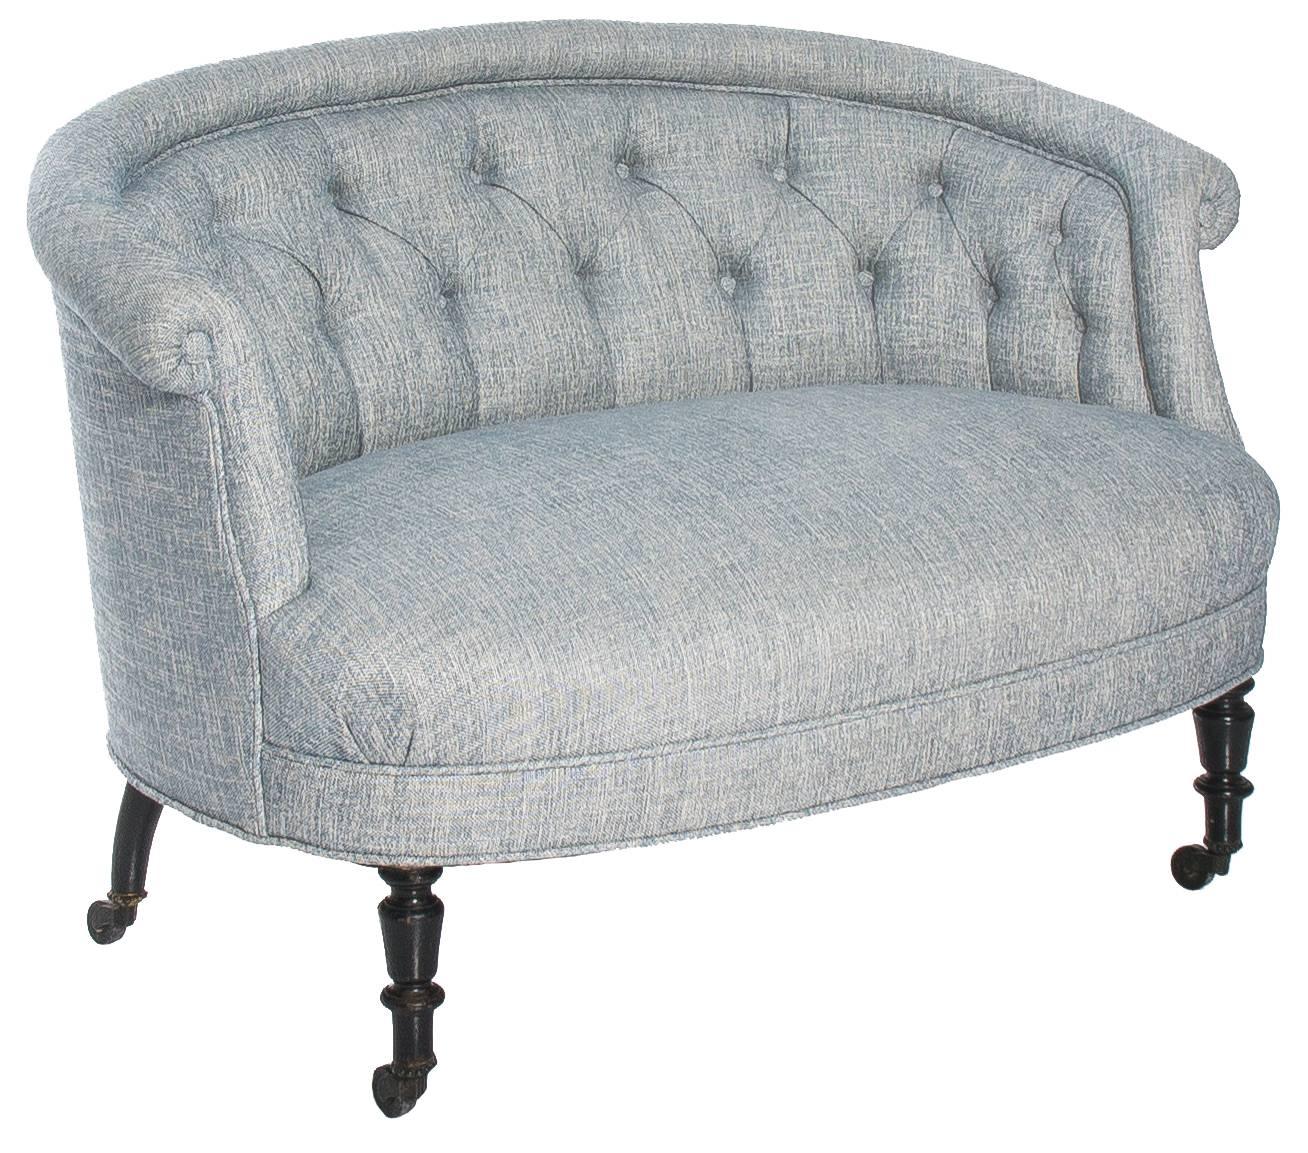 Petite French Napoleon III round scroll back sofa, circa 1880s. Turned black legs with original castors. Newly upholstered in Manuel Canovas 'Marius' in Ciel (light blue and white) linen.